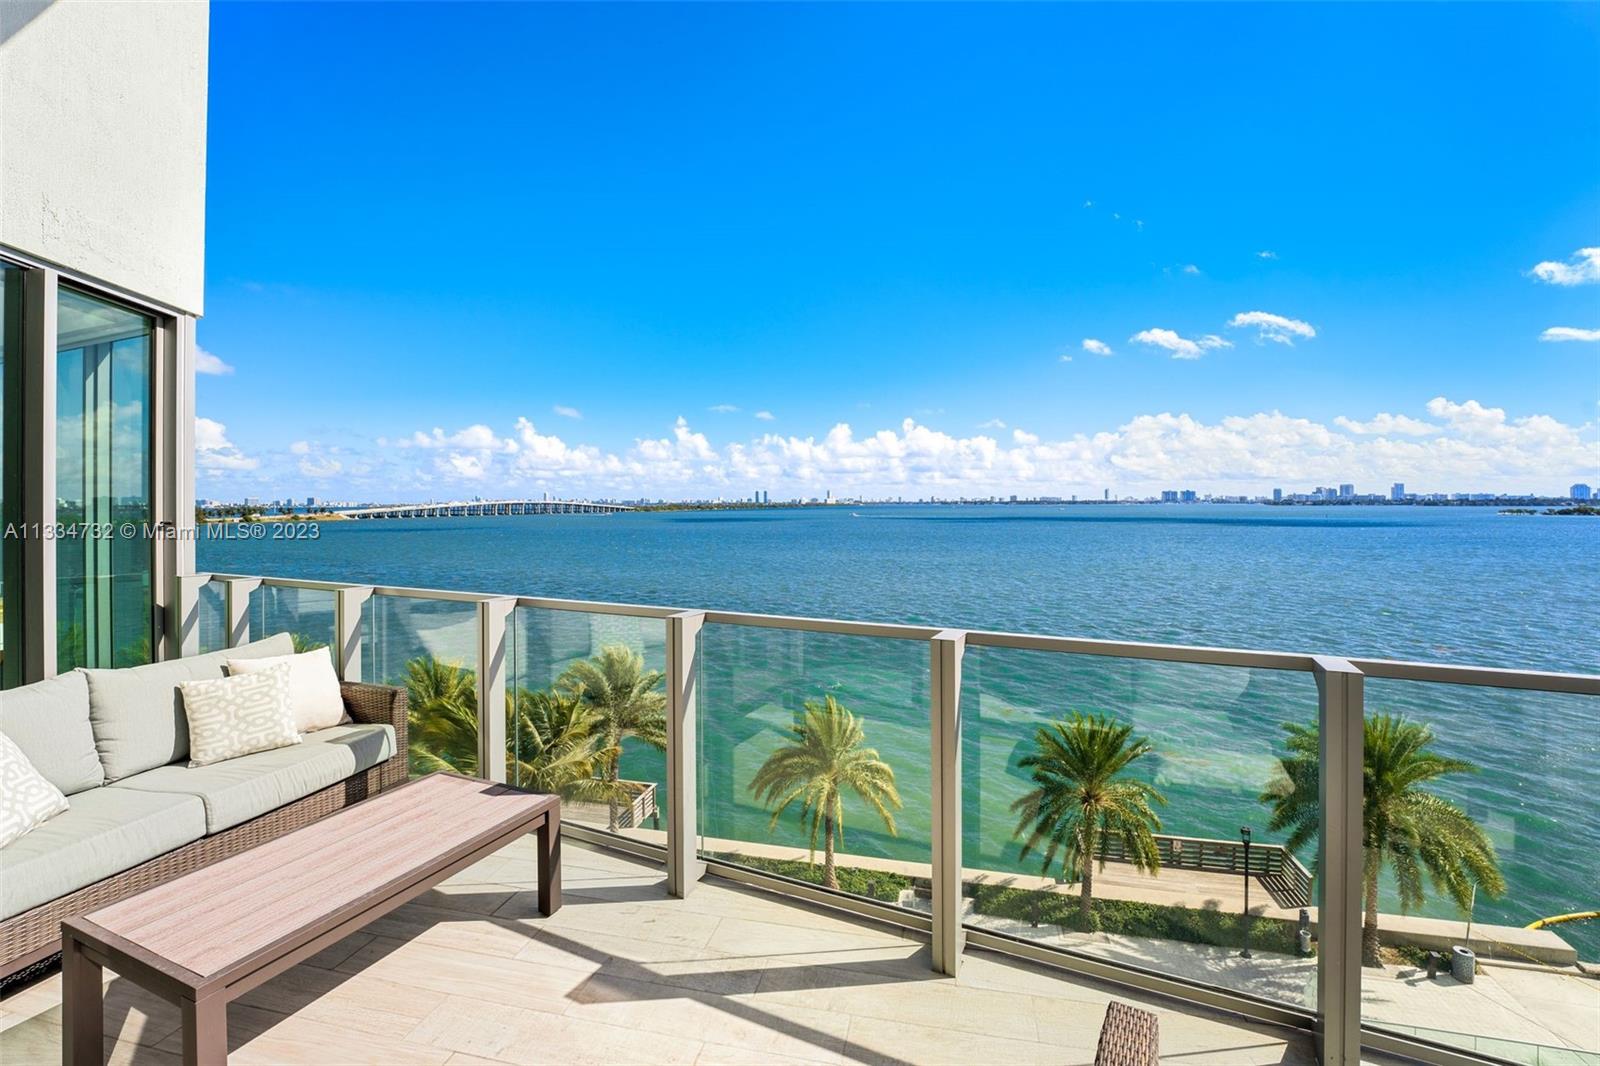 Enjoy unobstructed bay & Miami Beach views in this stunning residence in coveted Biscayne Beach. Enter this 4,146 SF residence through a private foyer that opens to breathtaking Biscayne Bay views w/80 linear ft. of living space facing directly east to the bay, floor-to-ceiling windows, 5 bedrooms, 5 full bathrooms & 1 half bath. Luxurious features incl captivating porcelain flrs, gourmet chef's kitchen with top-of-the-line appliances & 2 balconies overlooking the water. Oversized master w/sitting area & spacious closets in all bedrooms. Resort-style amenities that incl beach club w/cabanas, summer kitchen, 2 pools, jacuzzi, restaurant, lounge rm, theatre, business center, fitness center. Two reserved (side by side) parking spots –steps from your private vestibule on the same level.